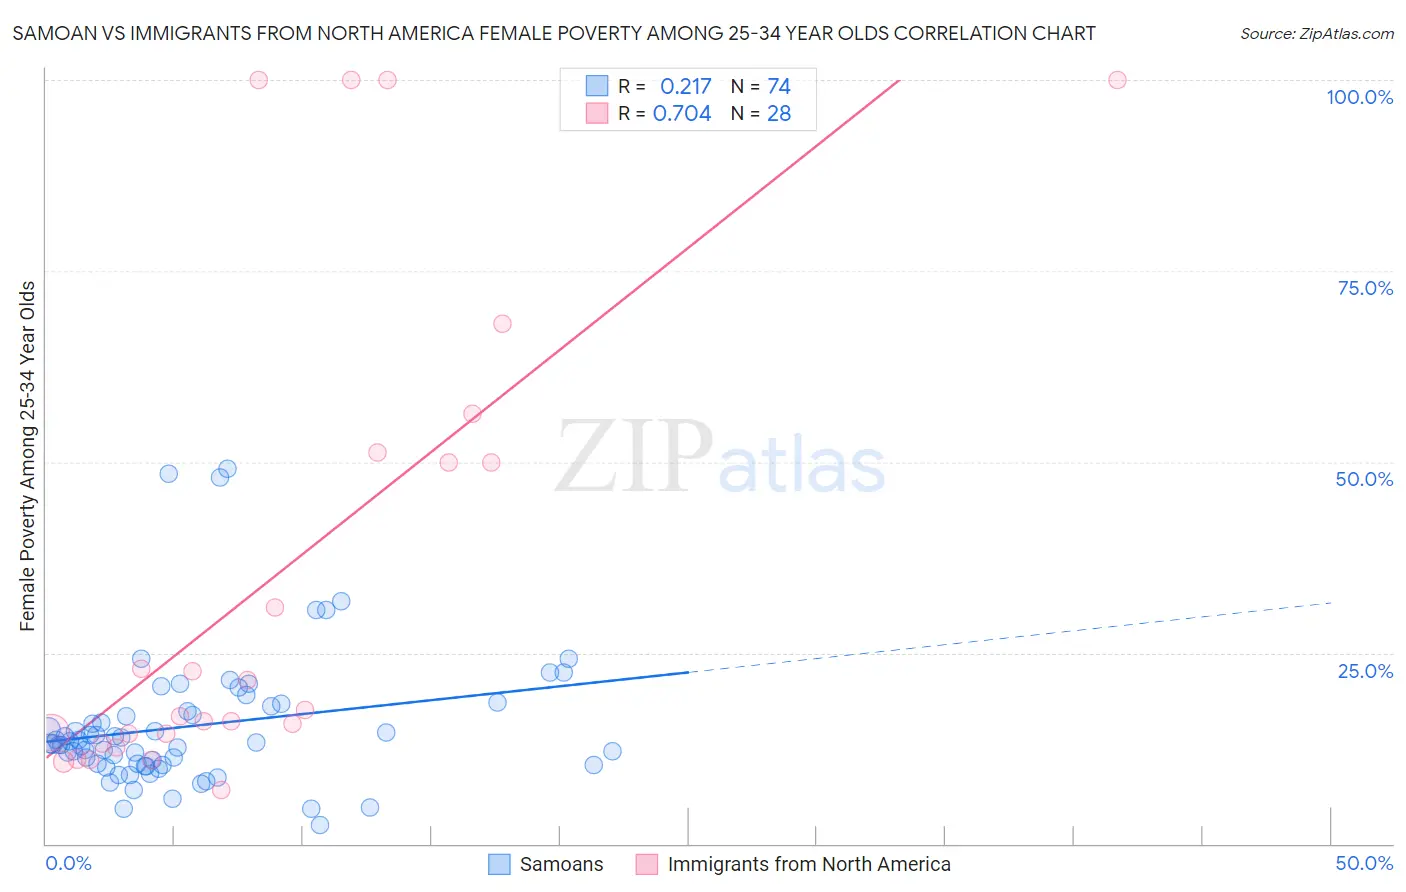 Samoan vs Immigrants from North America Female Poverty Among 25-34 Year Olds